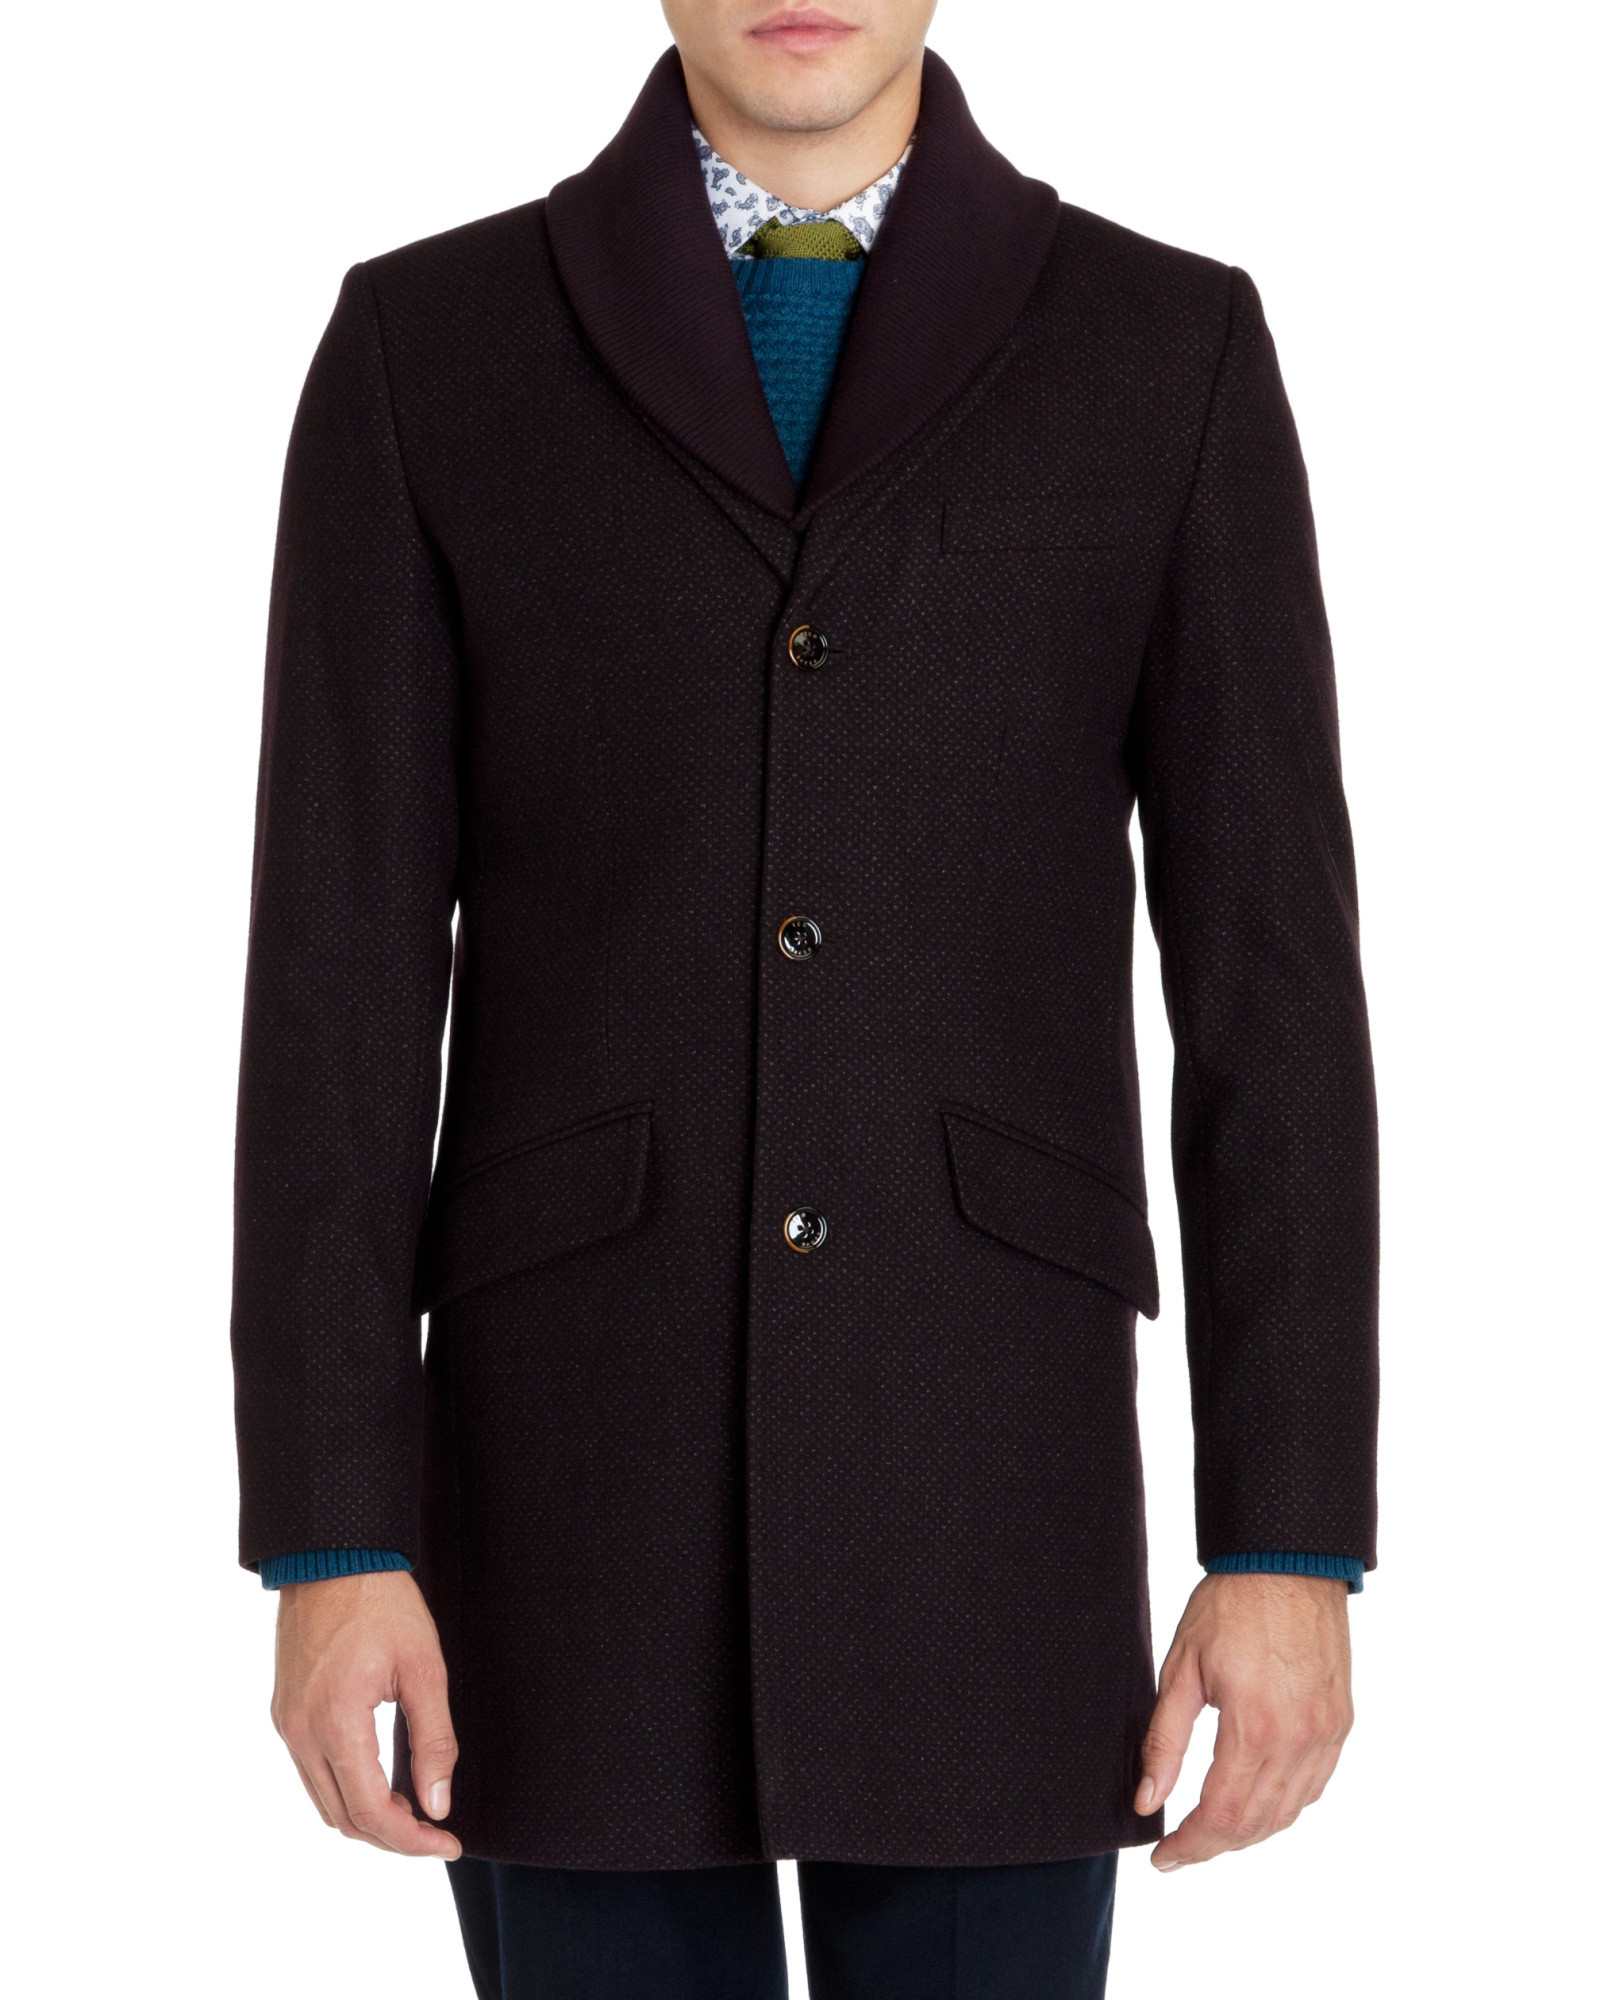 Lyst - Ted Baker Wool Coat in Red for Men